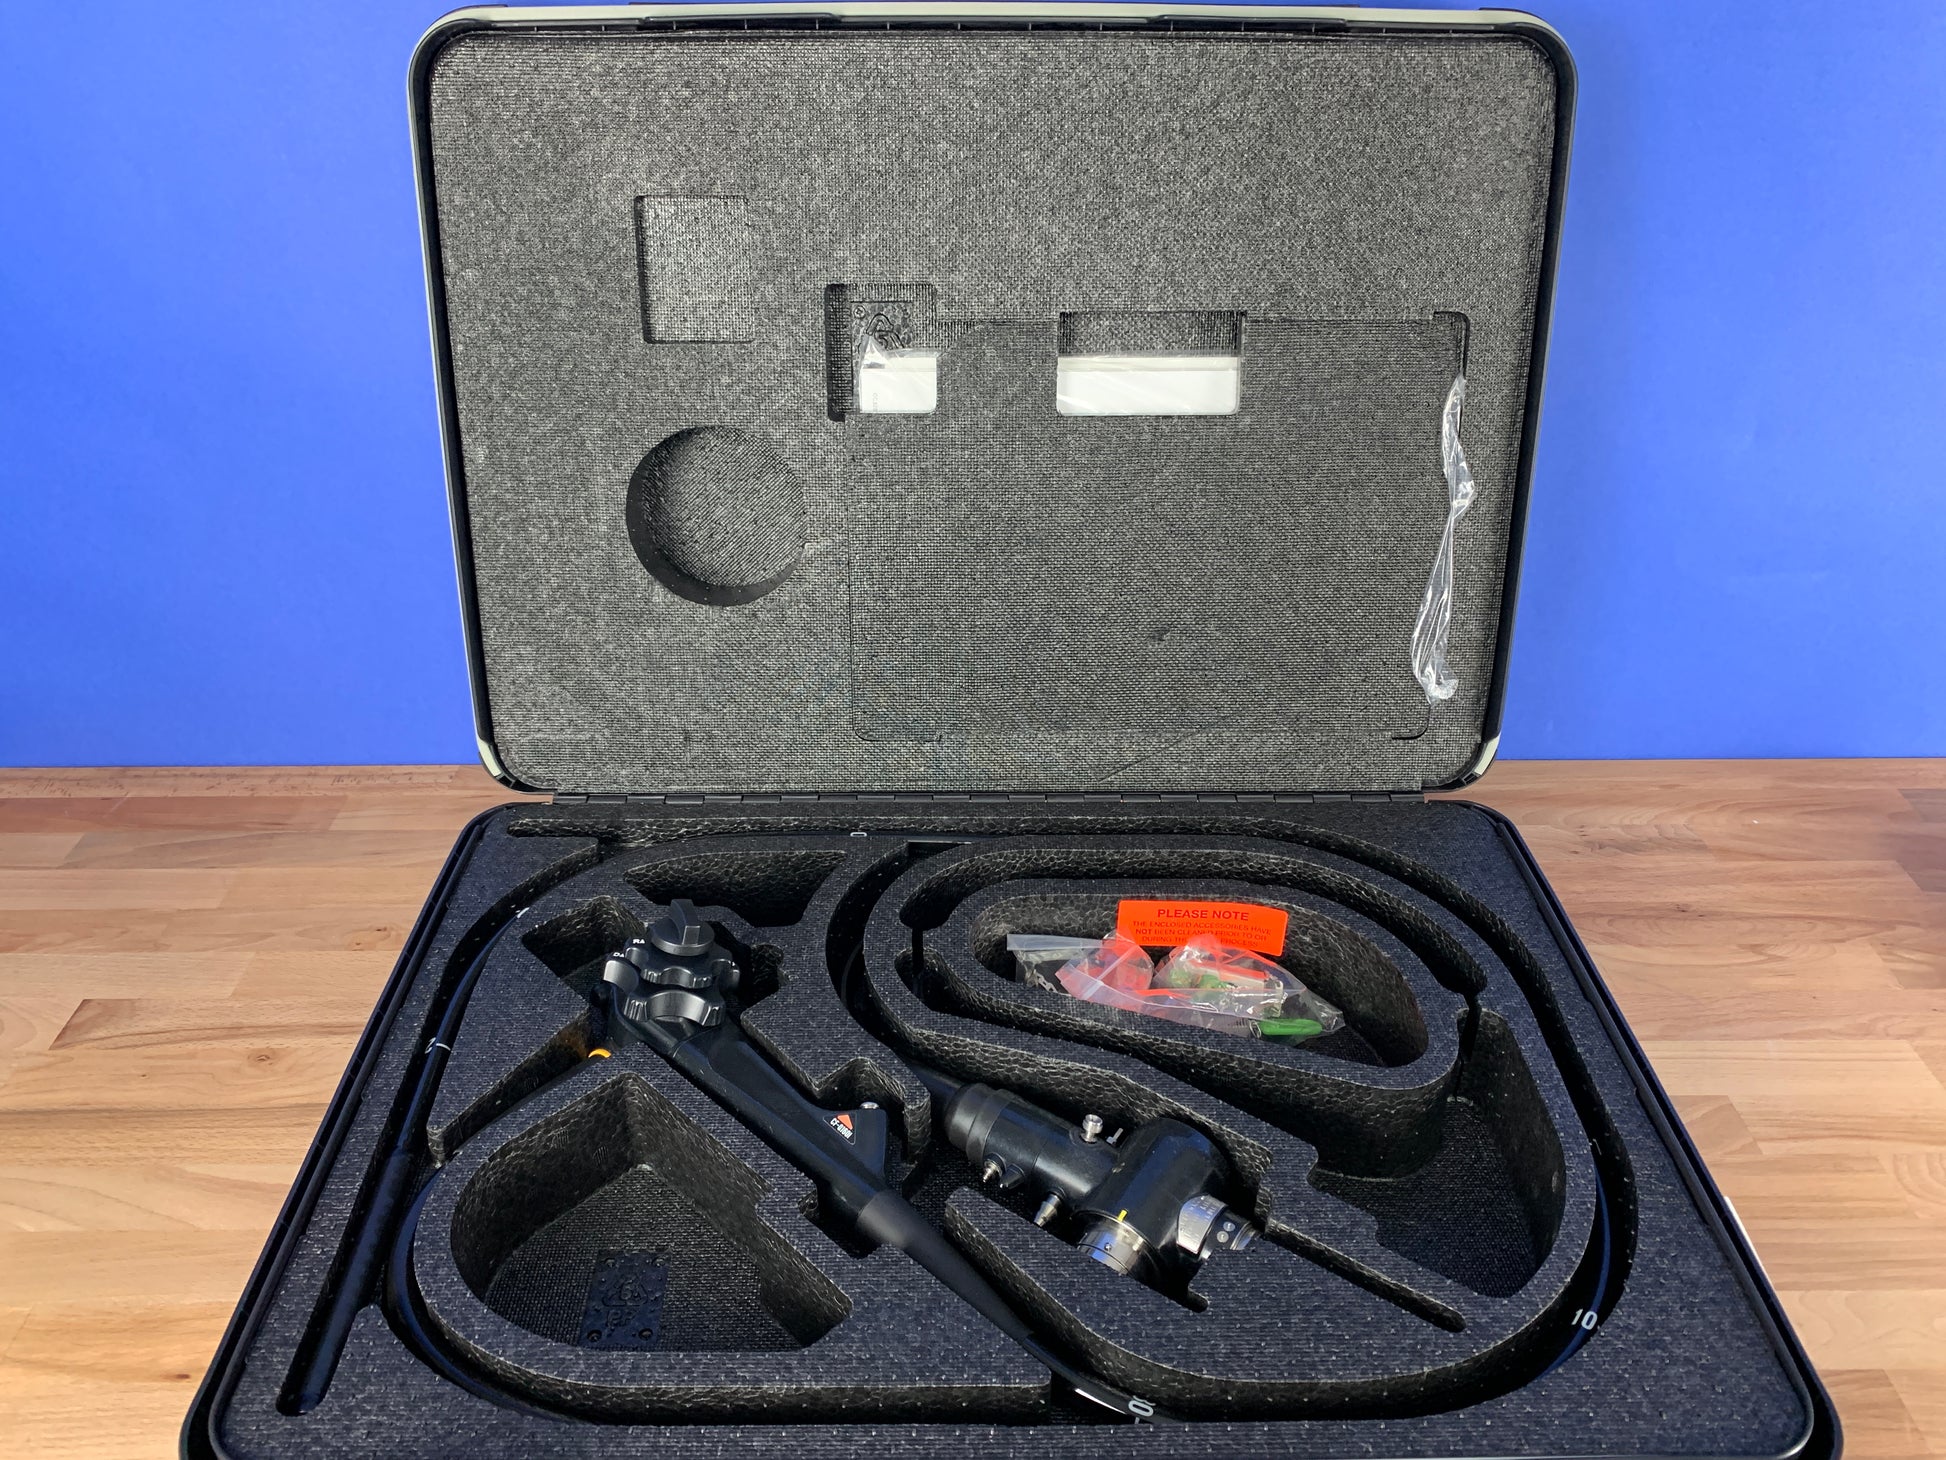 Endoscope Easy mucosal cleaning for better observation Super-wide-angle images Built-in scope identification